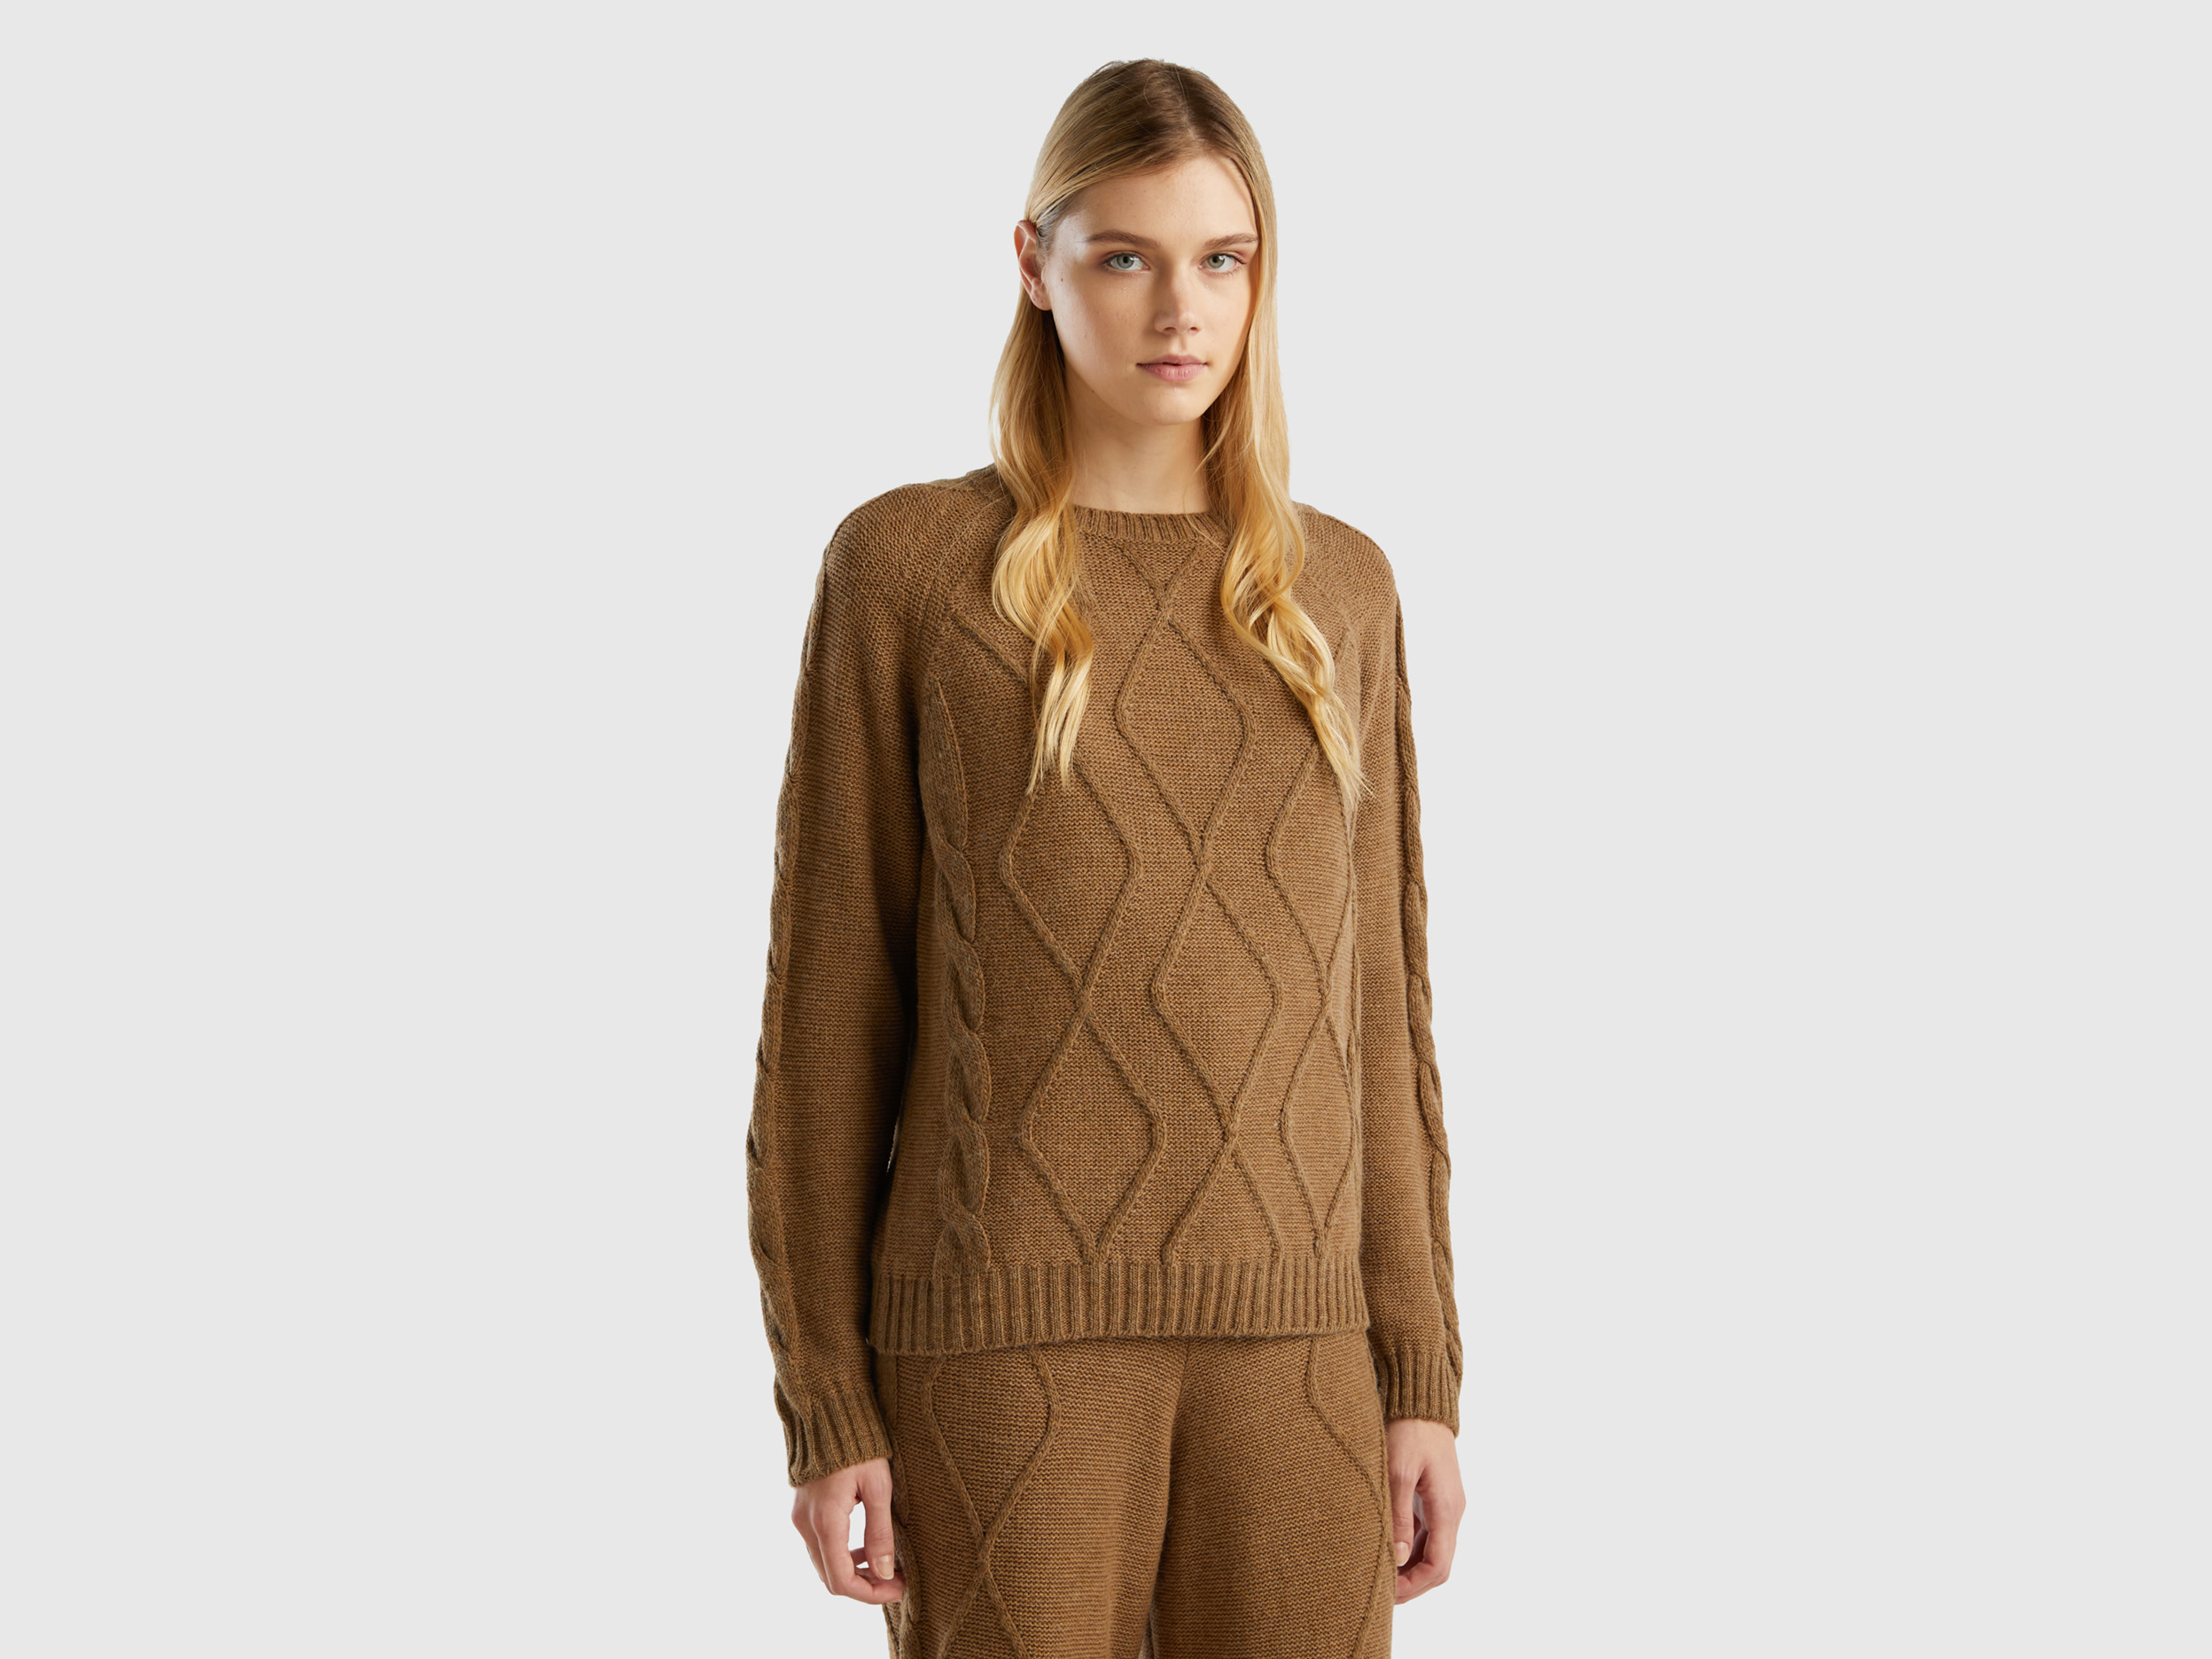 Benetton, Sweater With Cables And Diamonds, size M, Camel, Women